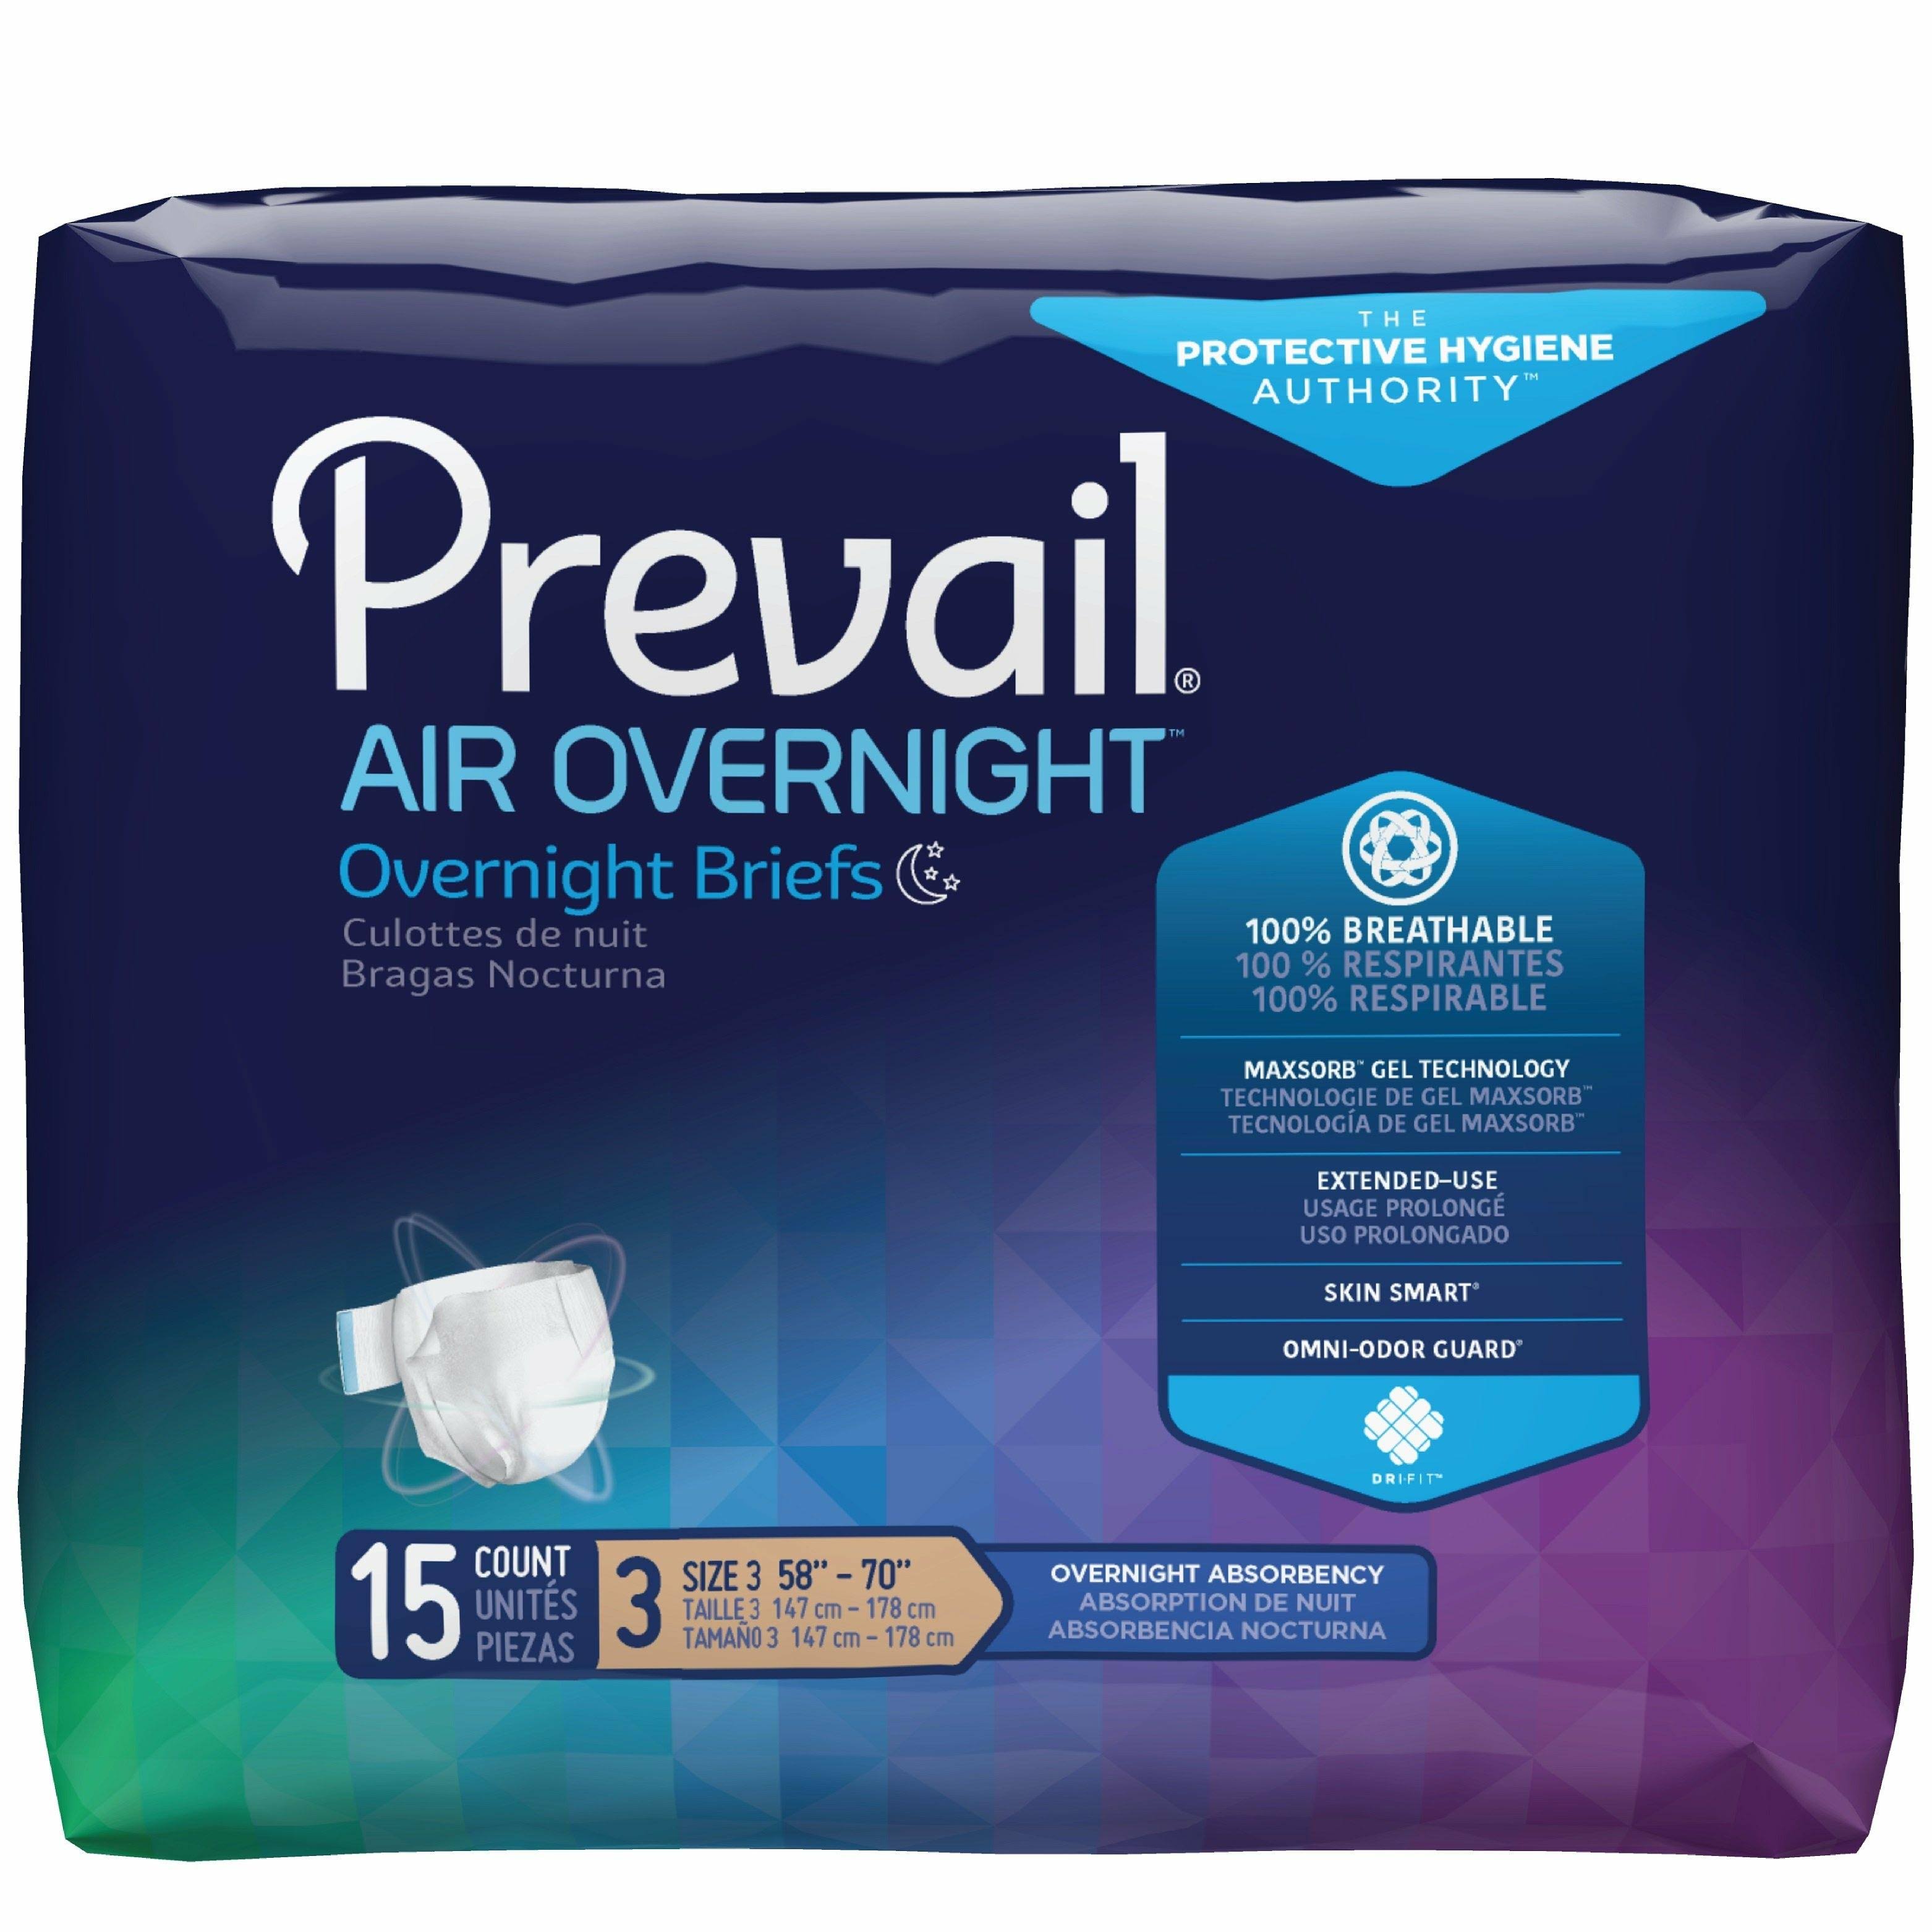 First Quality Adult Incontinence Brief, Size 3, 15 Bags